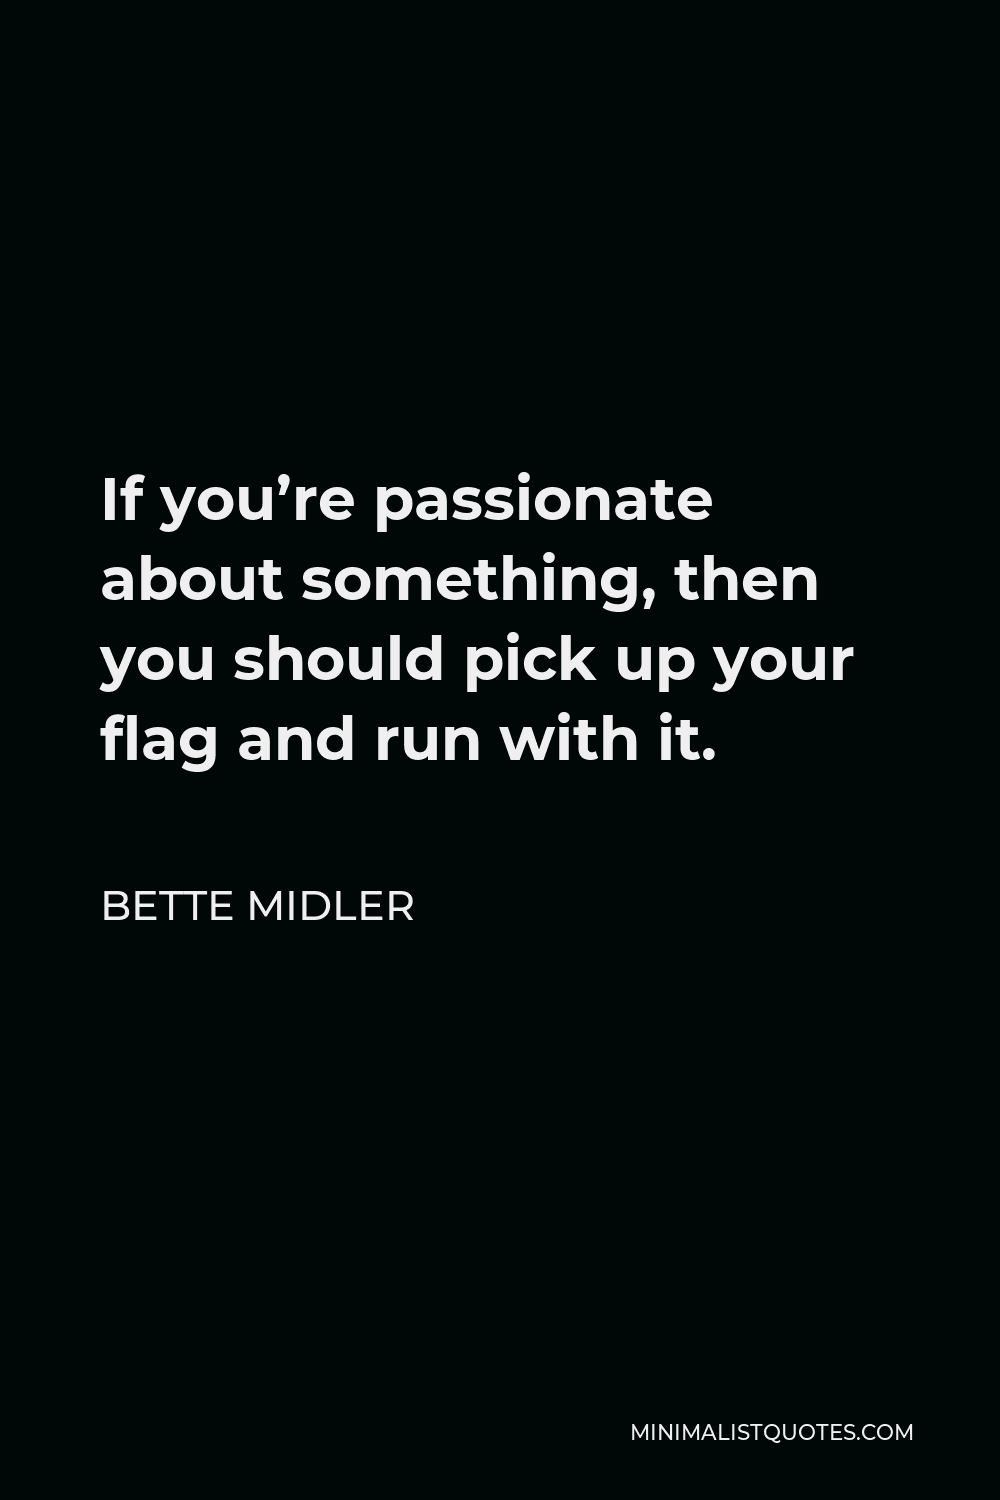 Bette Midler Quote - If you’re passionate about something, then you should pick up your flag and run with it.